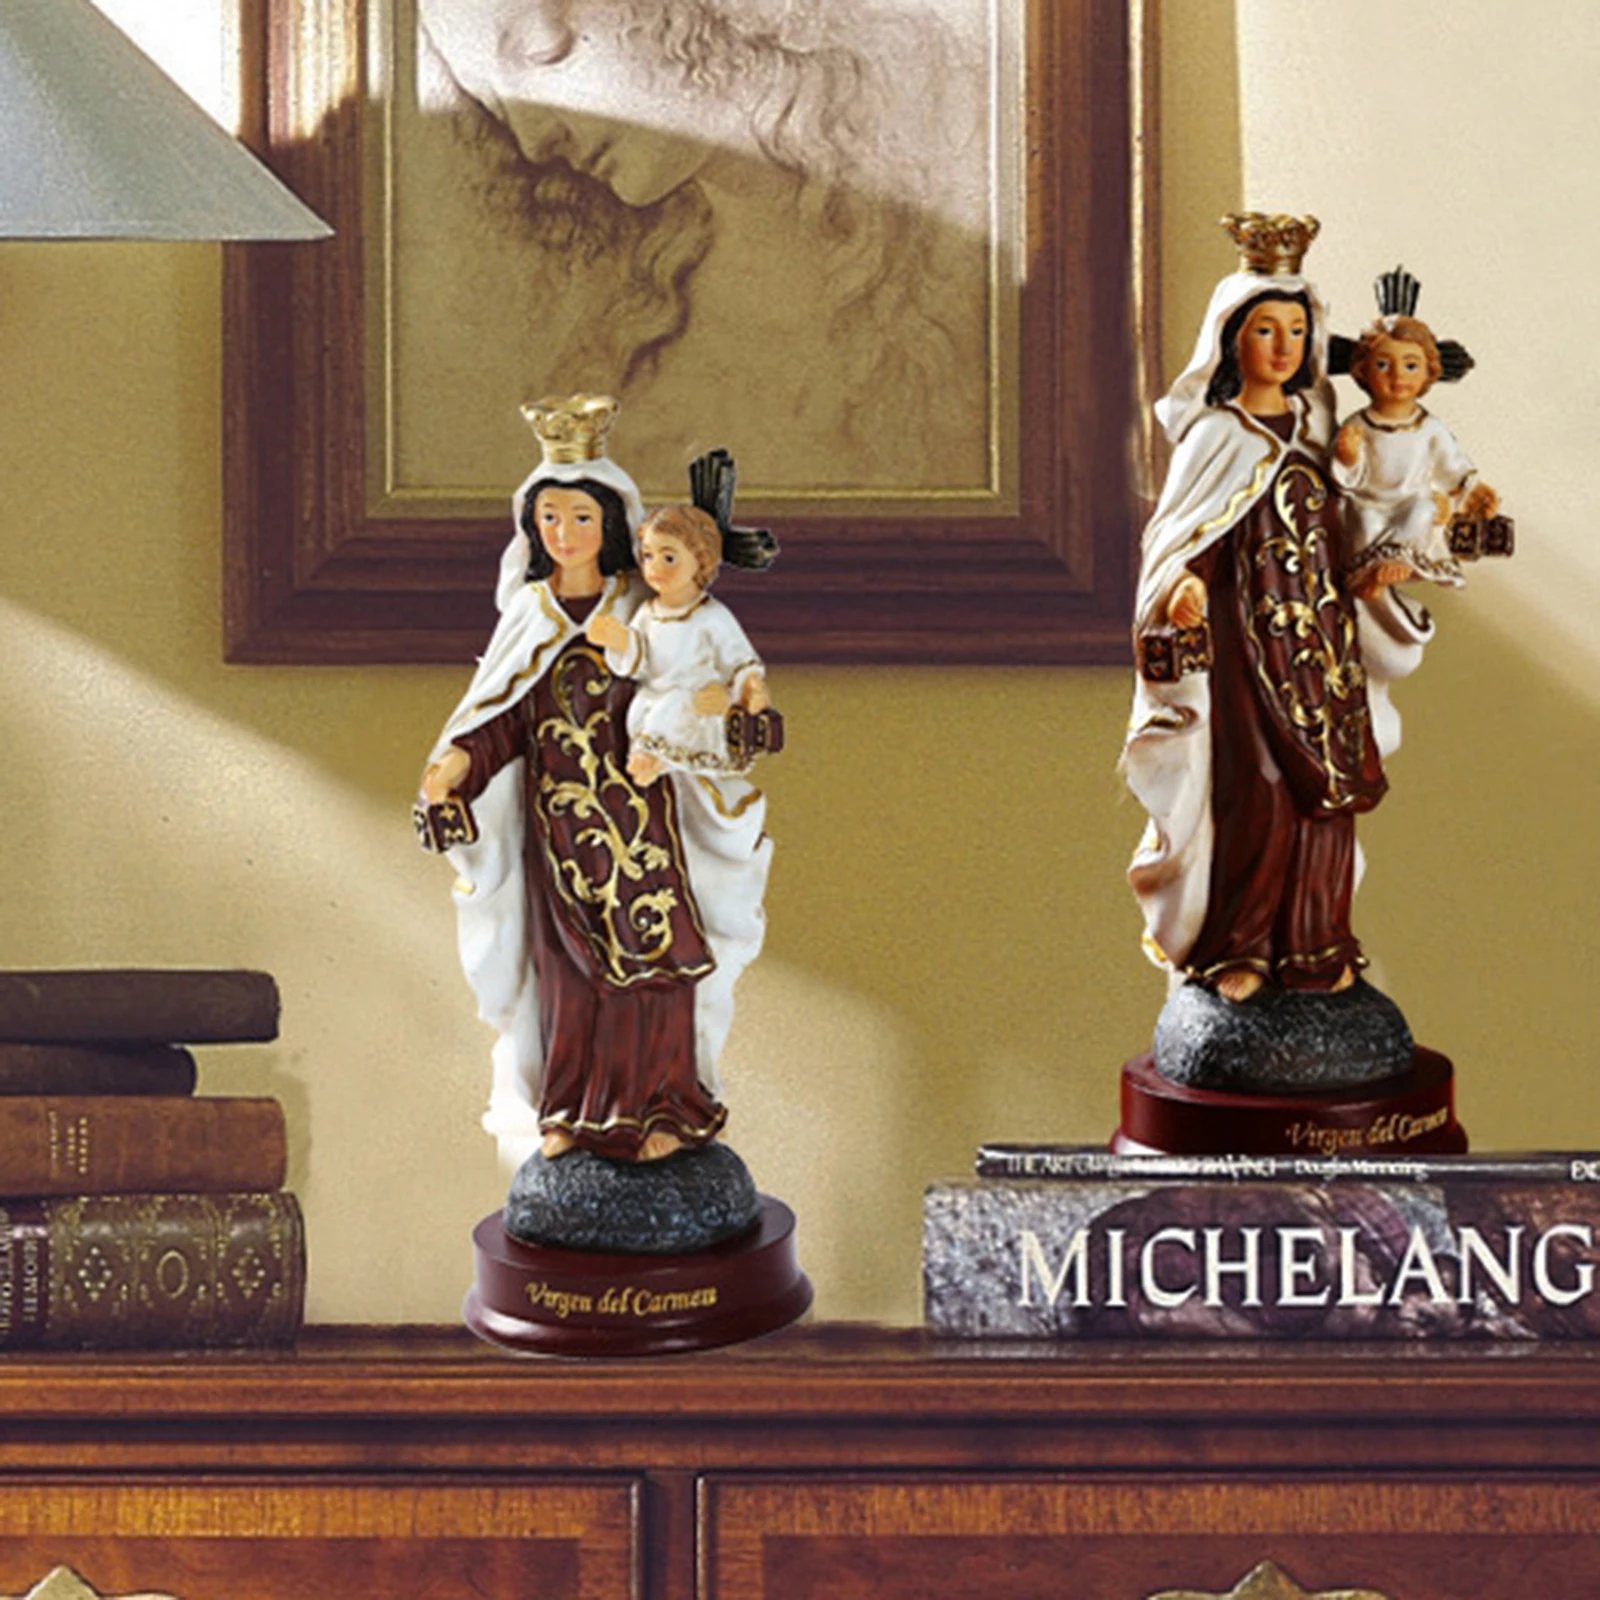 Exquisite Our Lady of Grace Virgin Mary Catholic Religious Statue Figurines